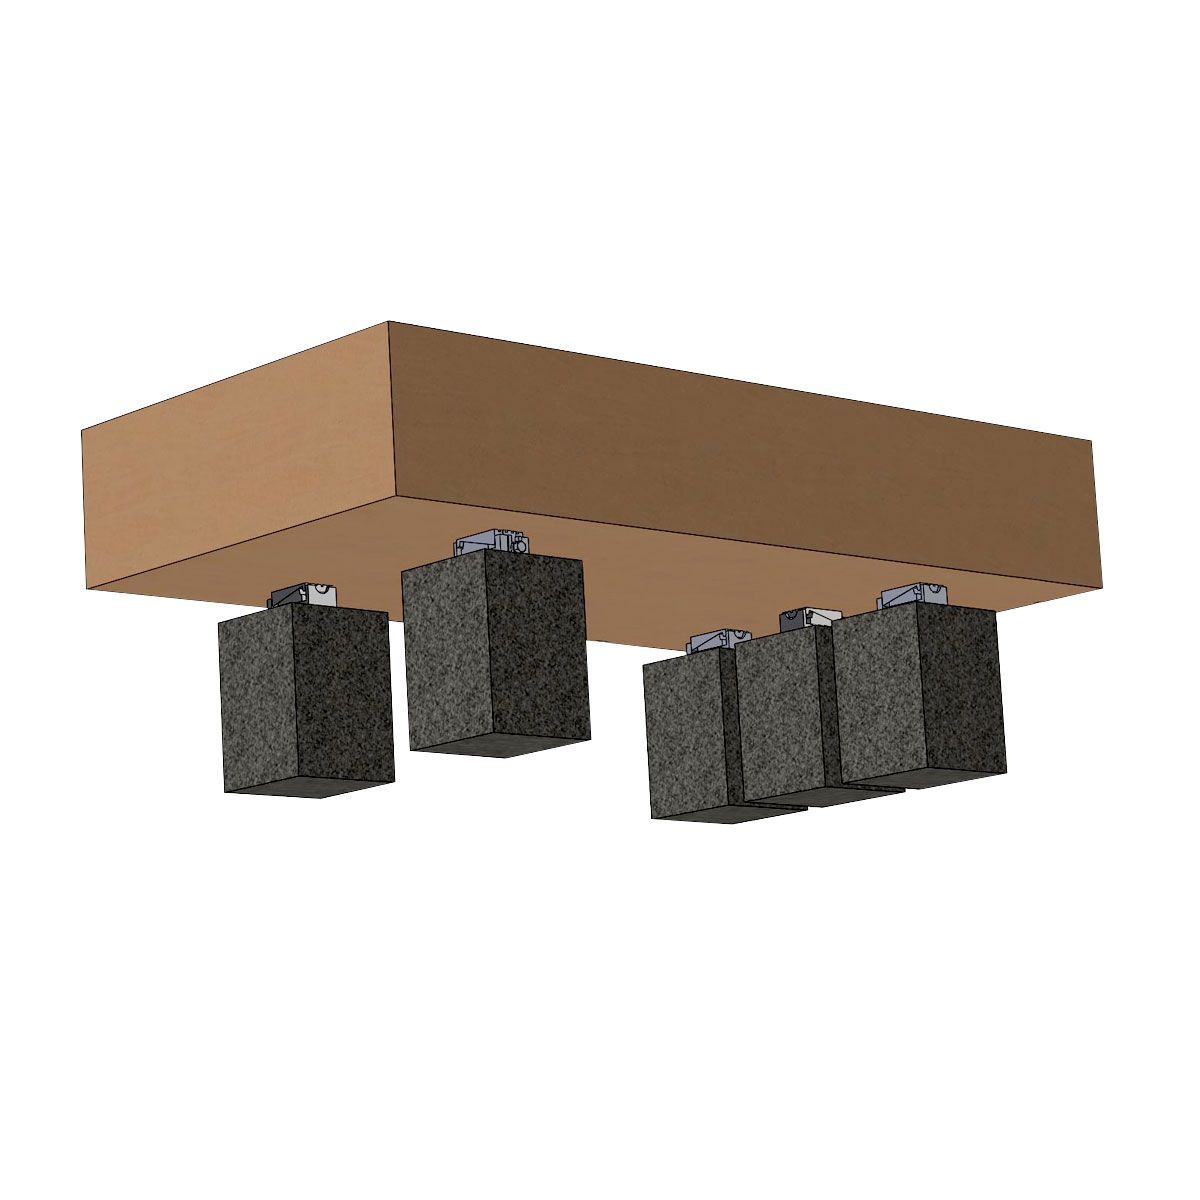 Block and wedge system supporting granite slab